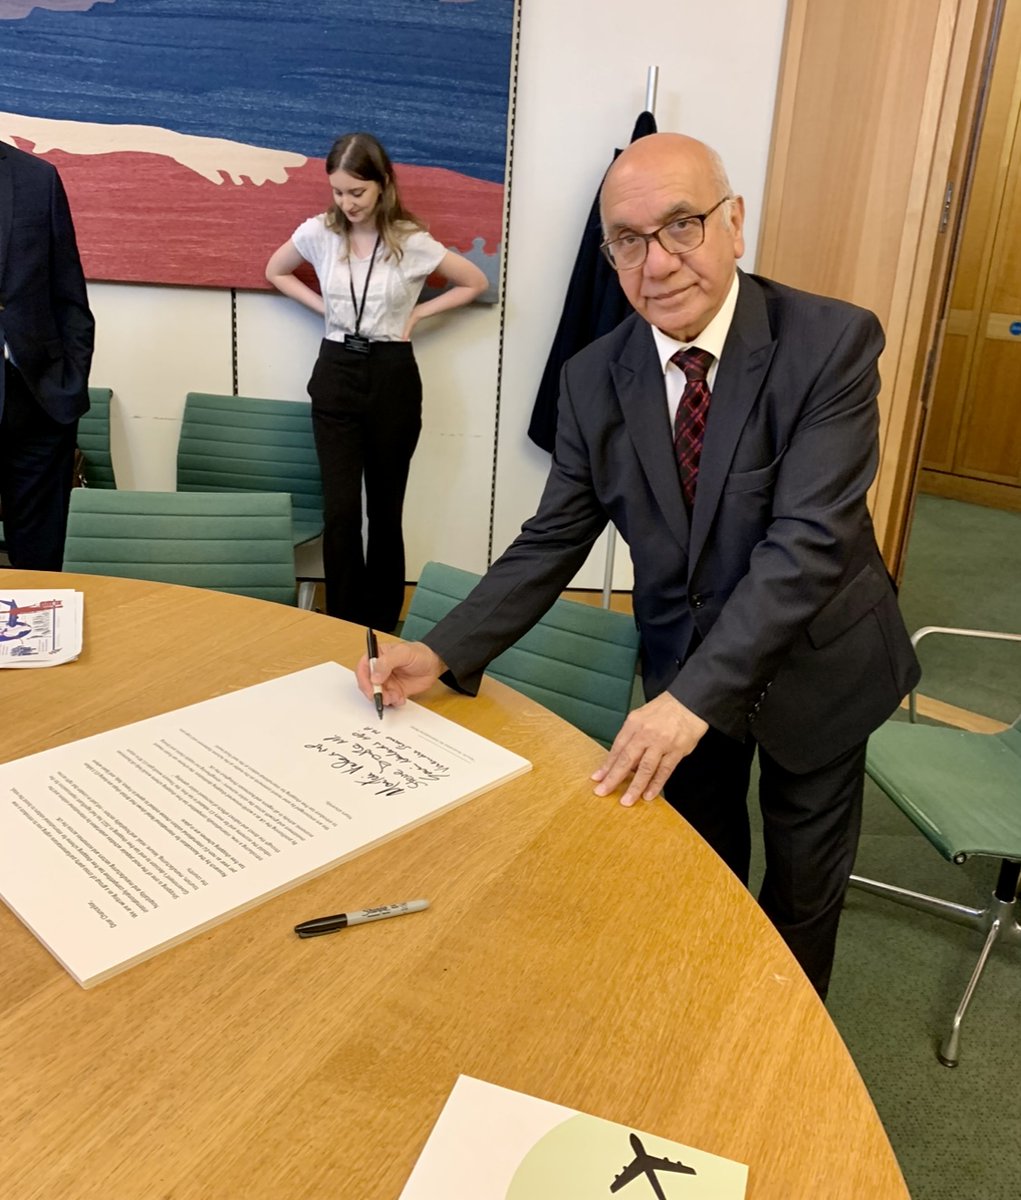 I joined colleagues today to co-sign a letter to the Chancellor calling for the reintroduction of tax-free shopping for international visitors to the UK. This is a vital call to boost retail, tourism, hospitality and culture sectors in Ealing Southall and across the UK.